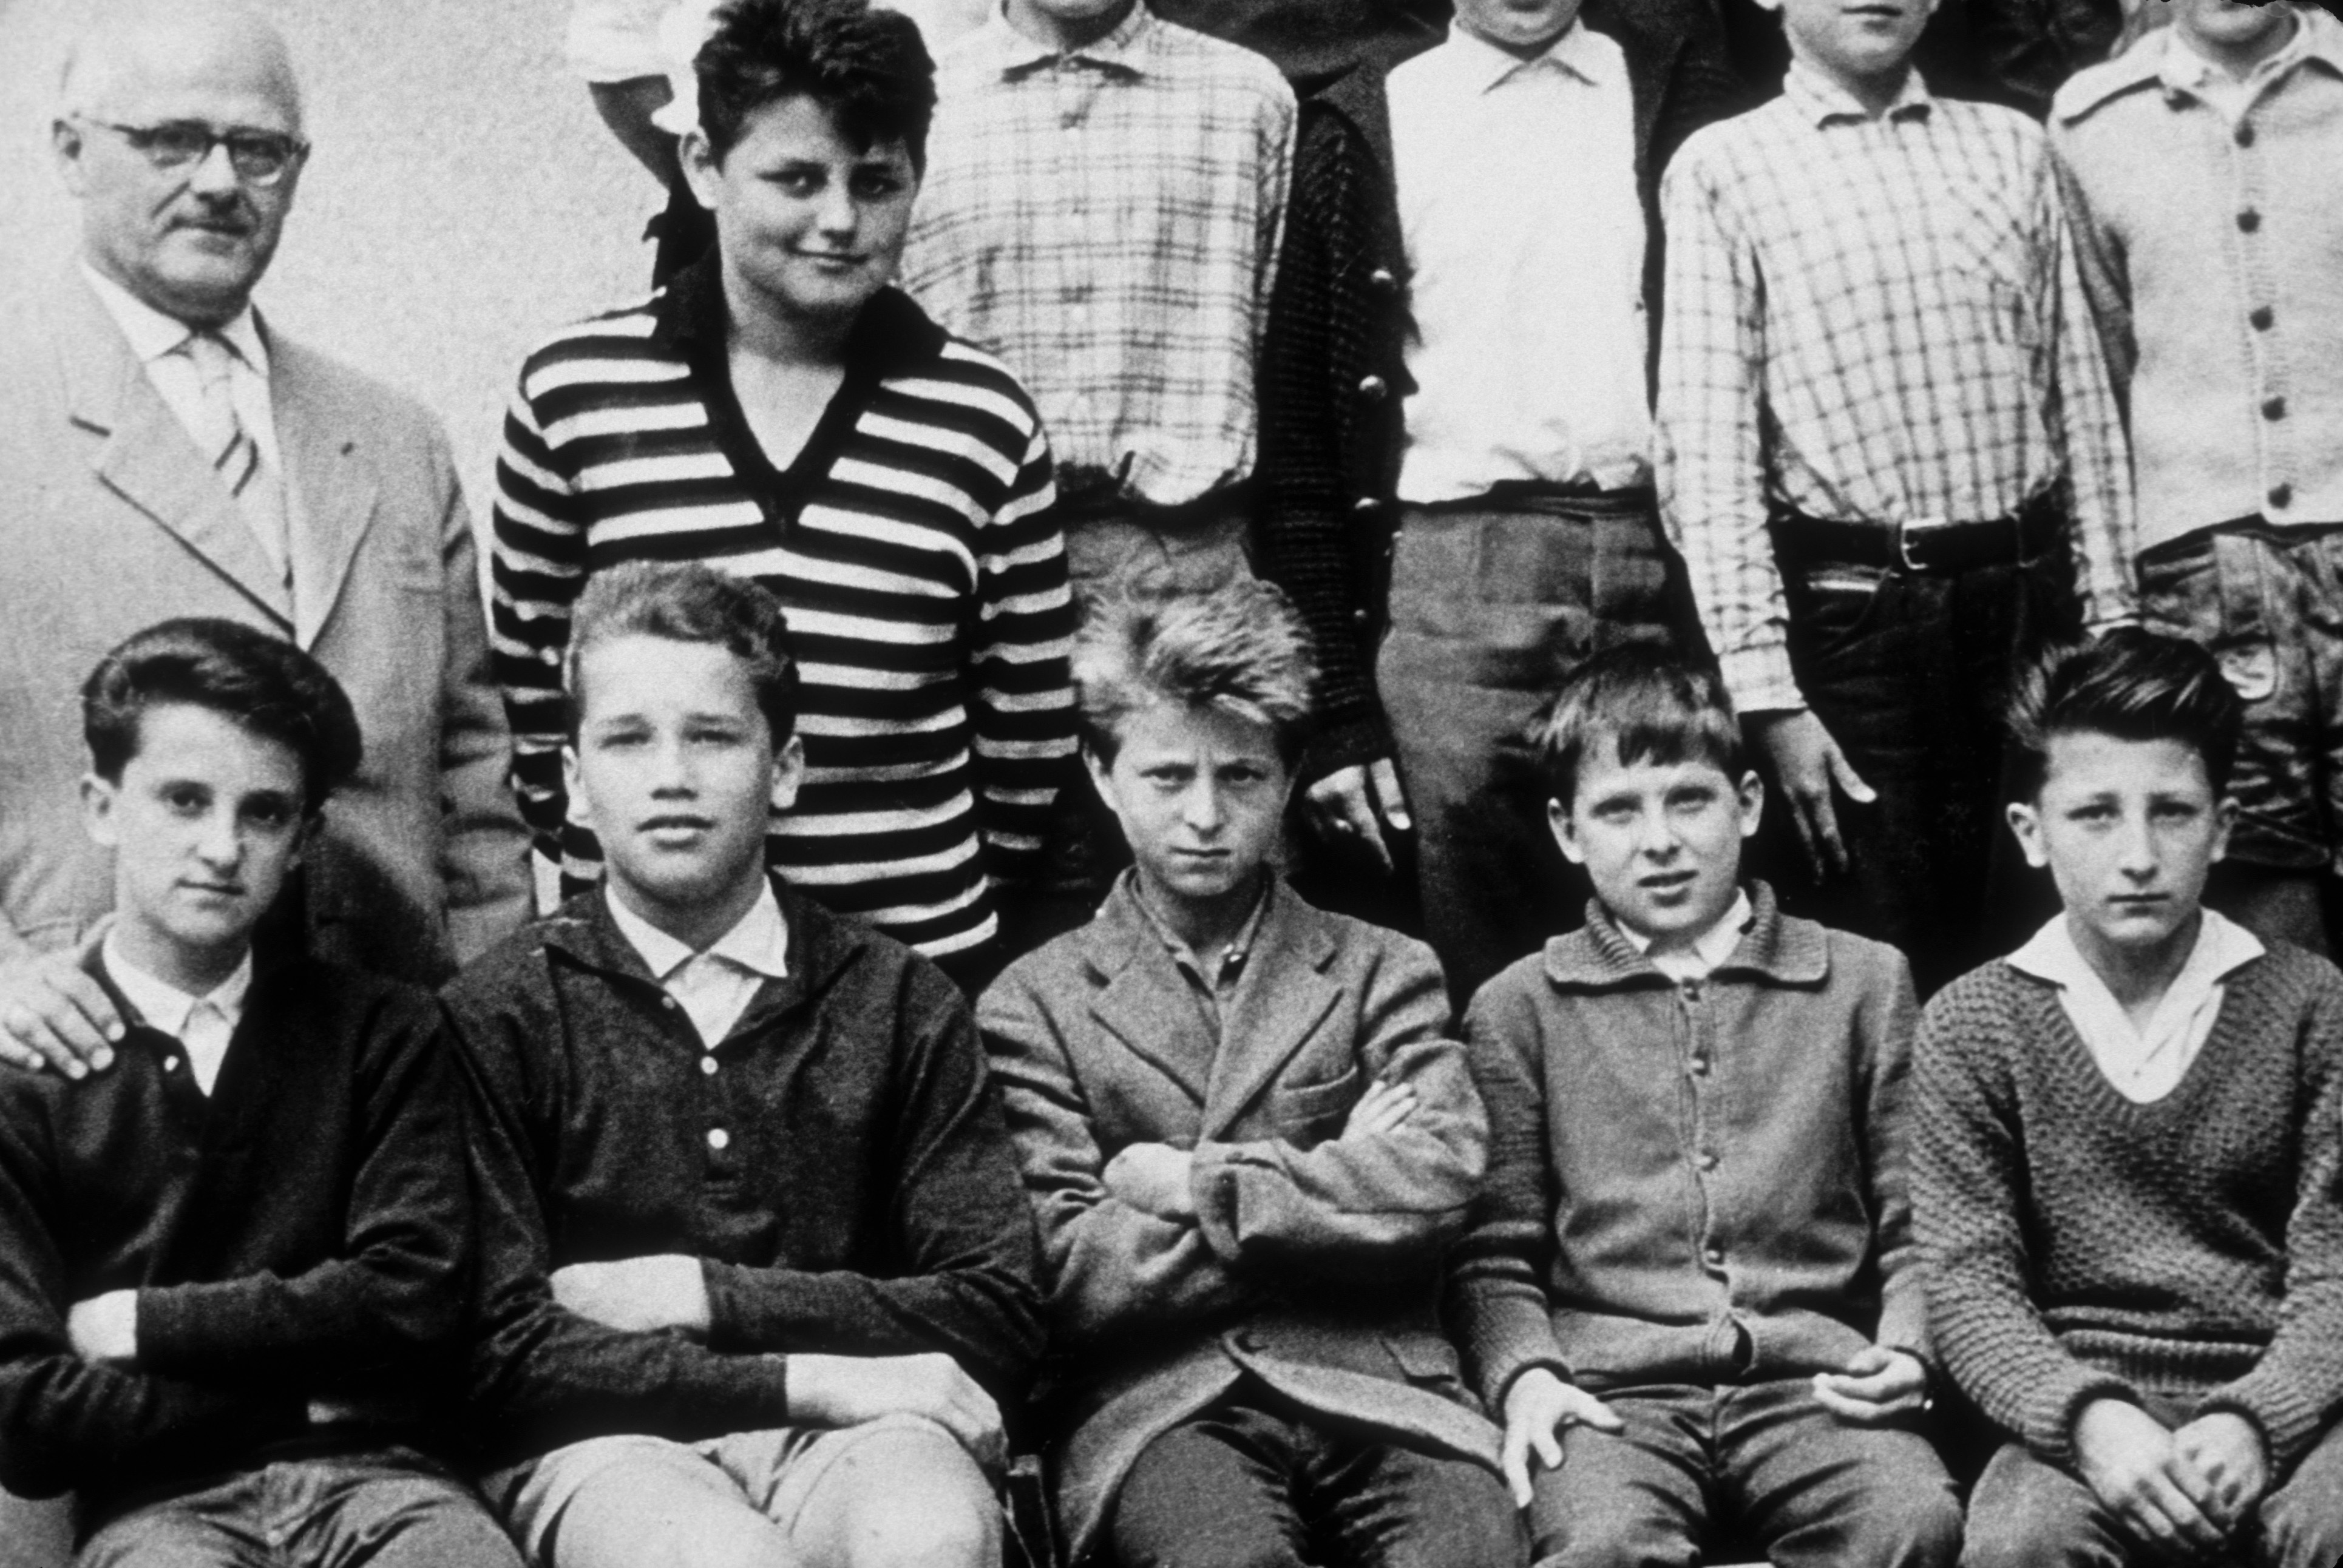 The boy (bottom row, second from left) poses for a photo with his classmates in Thal, Austria in 1958 | Source: Getty Images